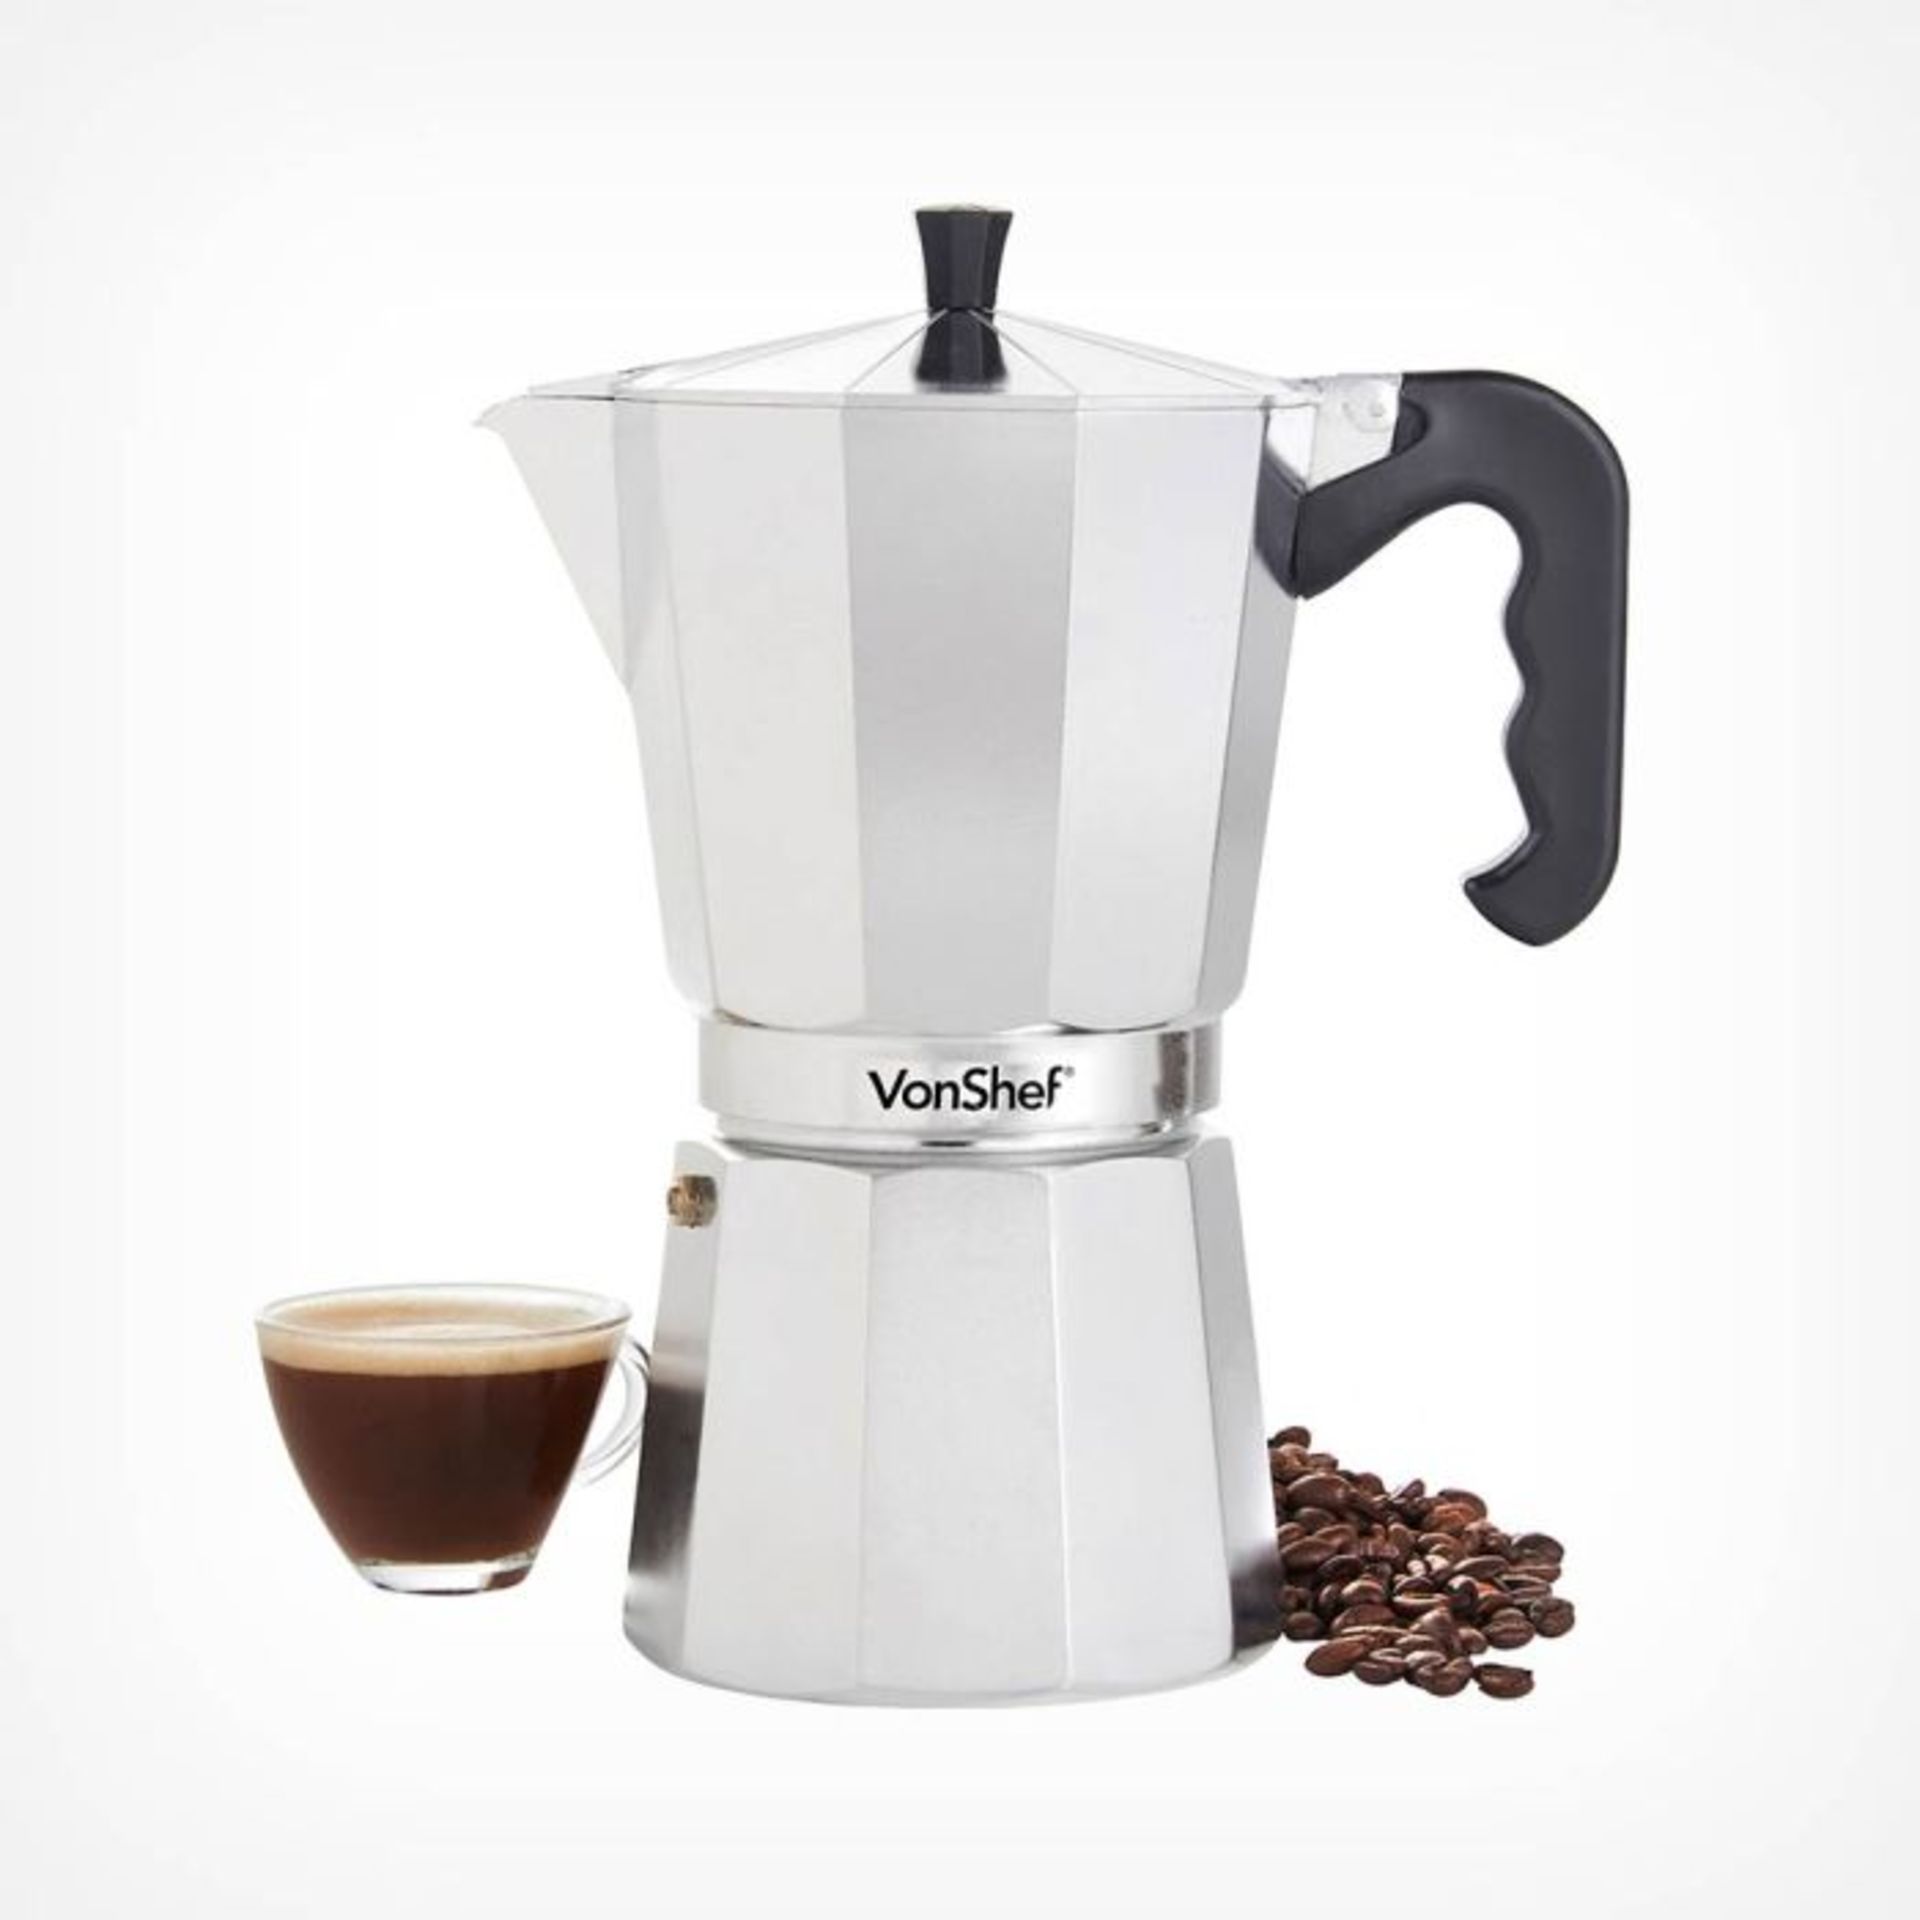 12 Cup Espresso Maker. The ideal size for serving up 12 cups of espresso, this time-tested device